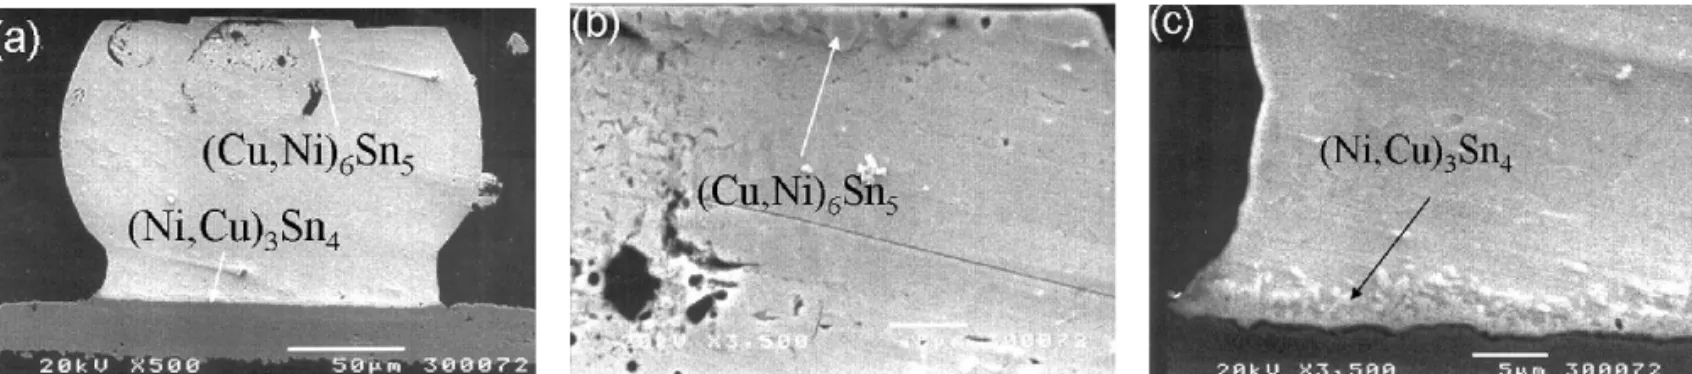 Fig. 4. The cross-sectional SEM images of Bump 2 after current stressing with current density 2   10 4 A/cm 2 at 150°C: (a) complete cross